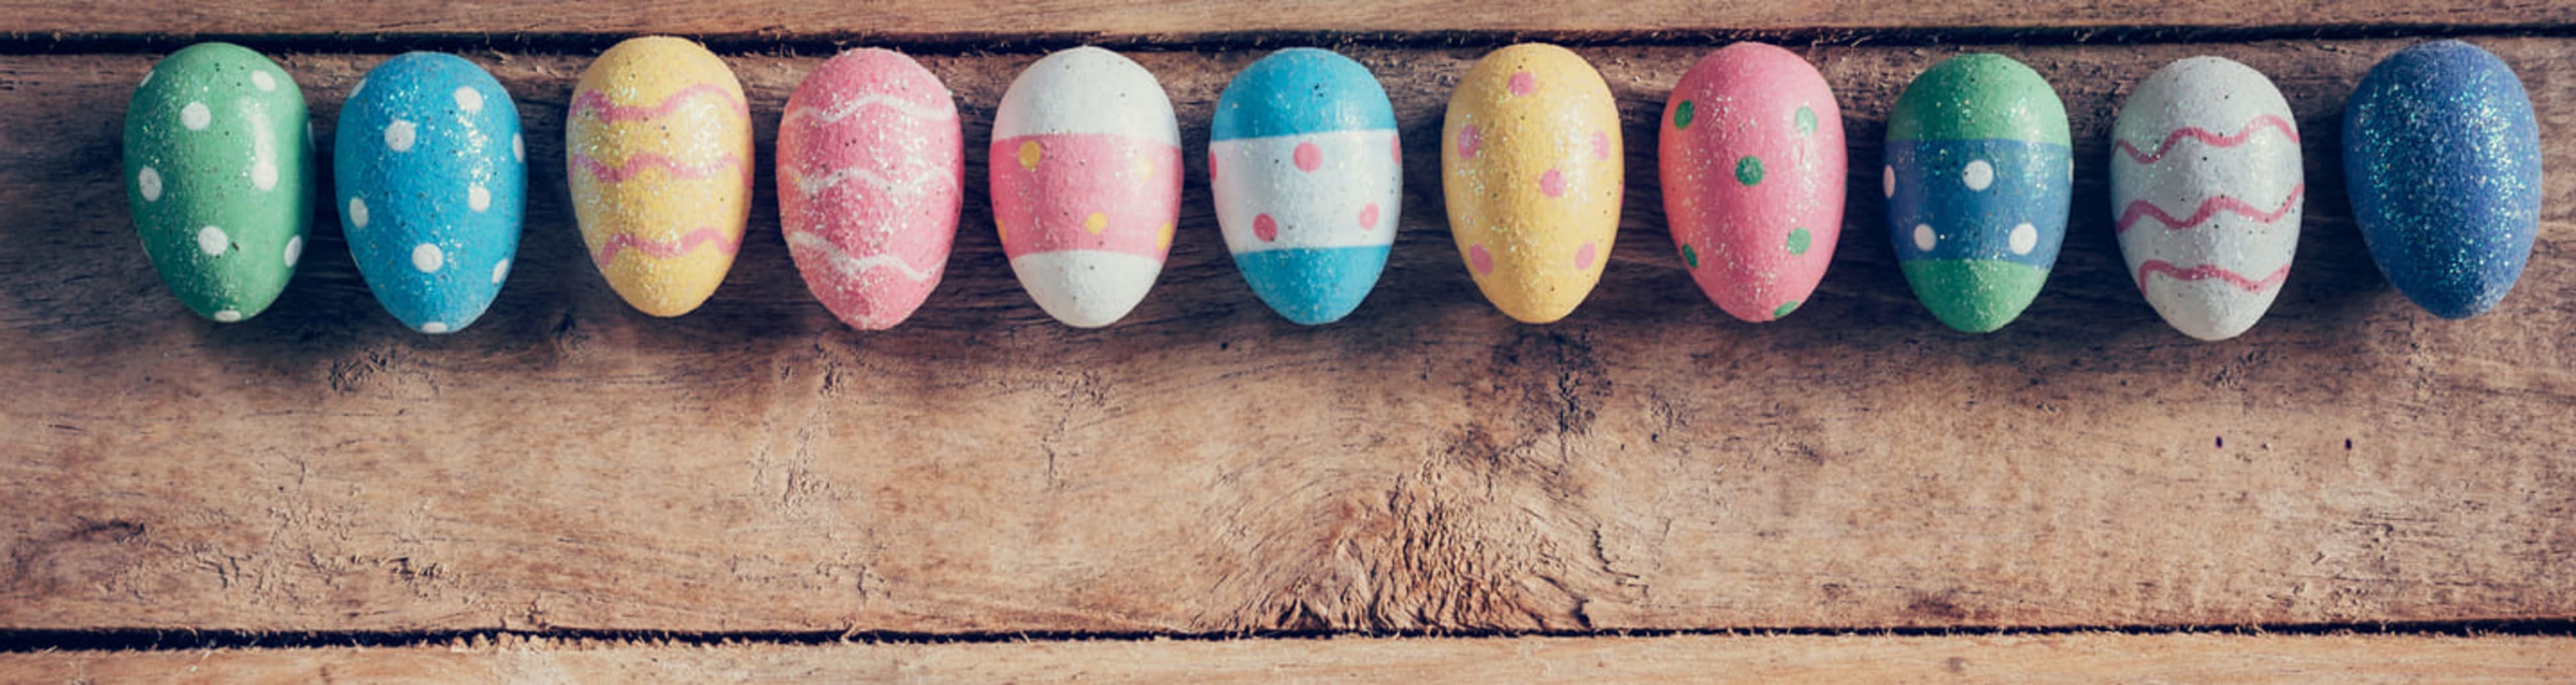 Colorfully painted Easter eggs on a wooden table